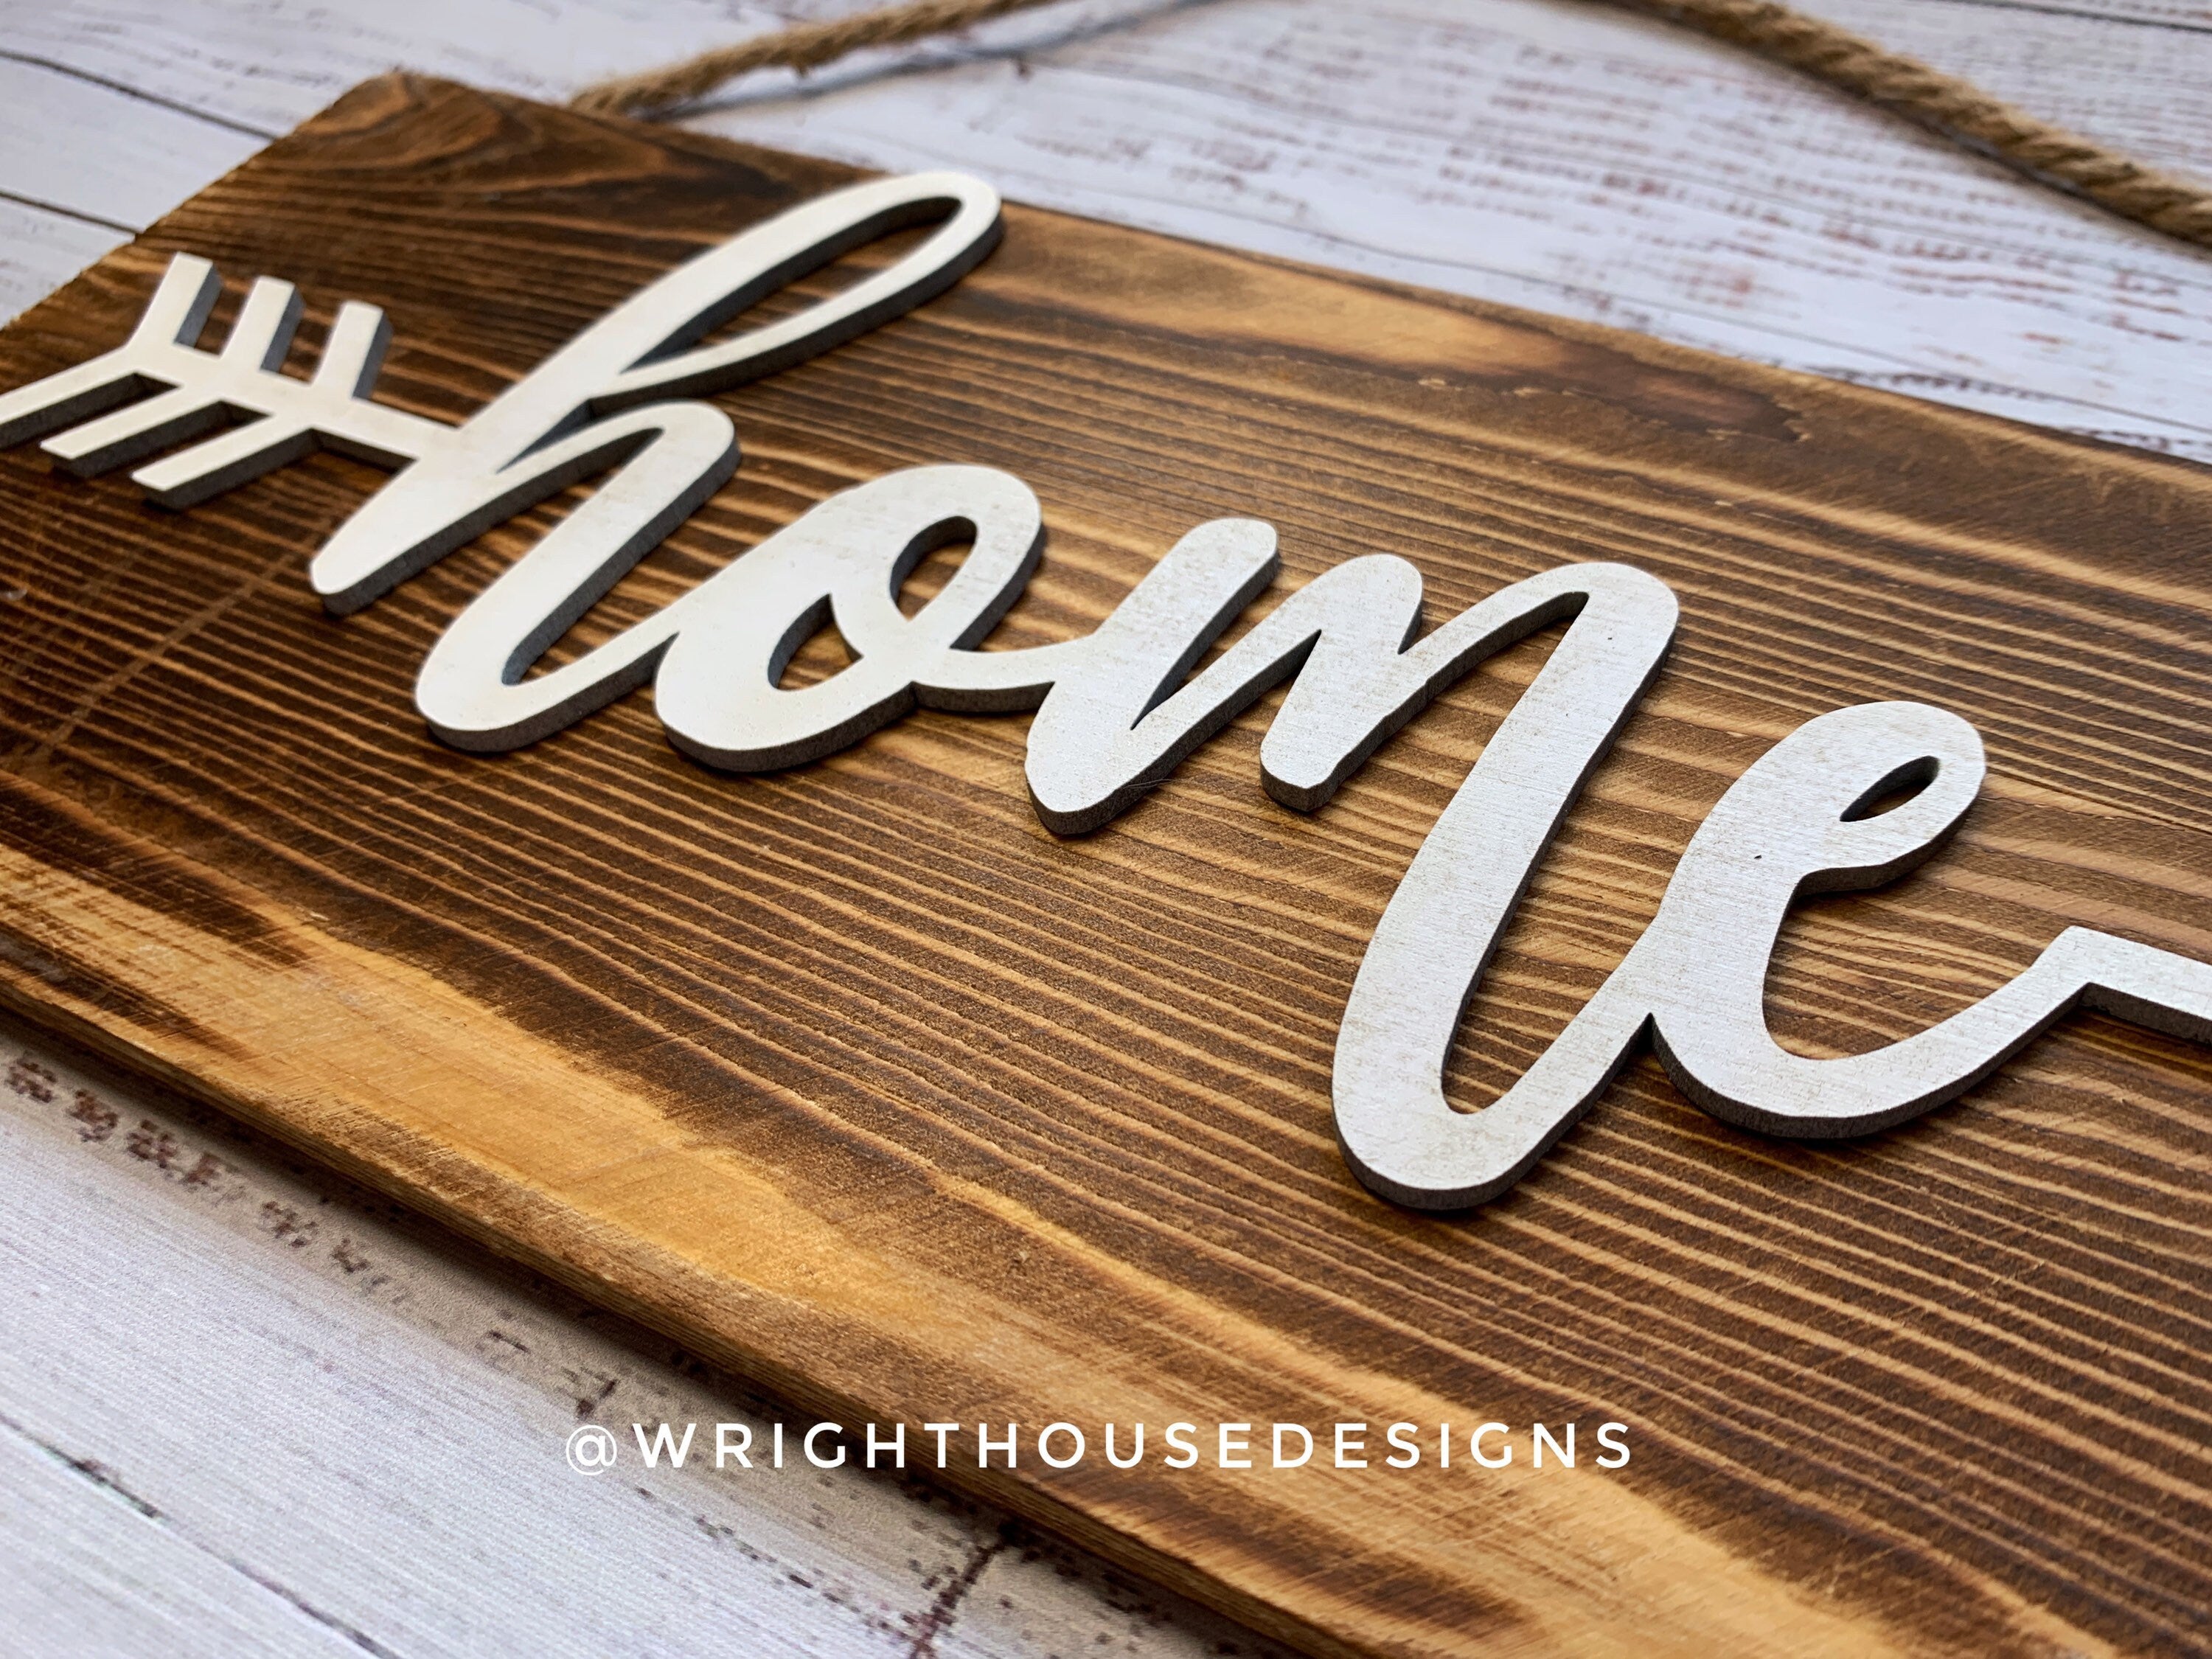 Home Arrow Word Art - Rustic Farmhouse - Reclaimed Pallet Plank Board Sign - Wooden Wall Art - Bookshelf Decor and She Shed Signs